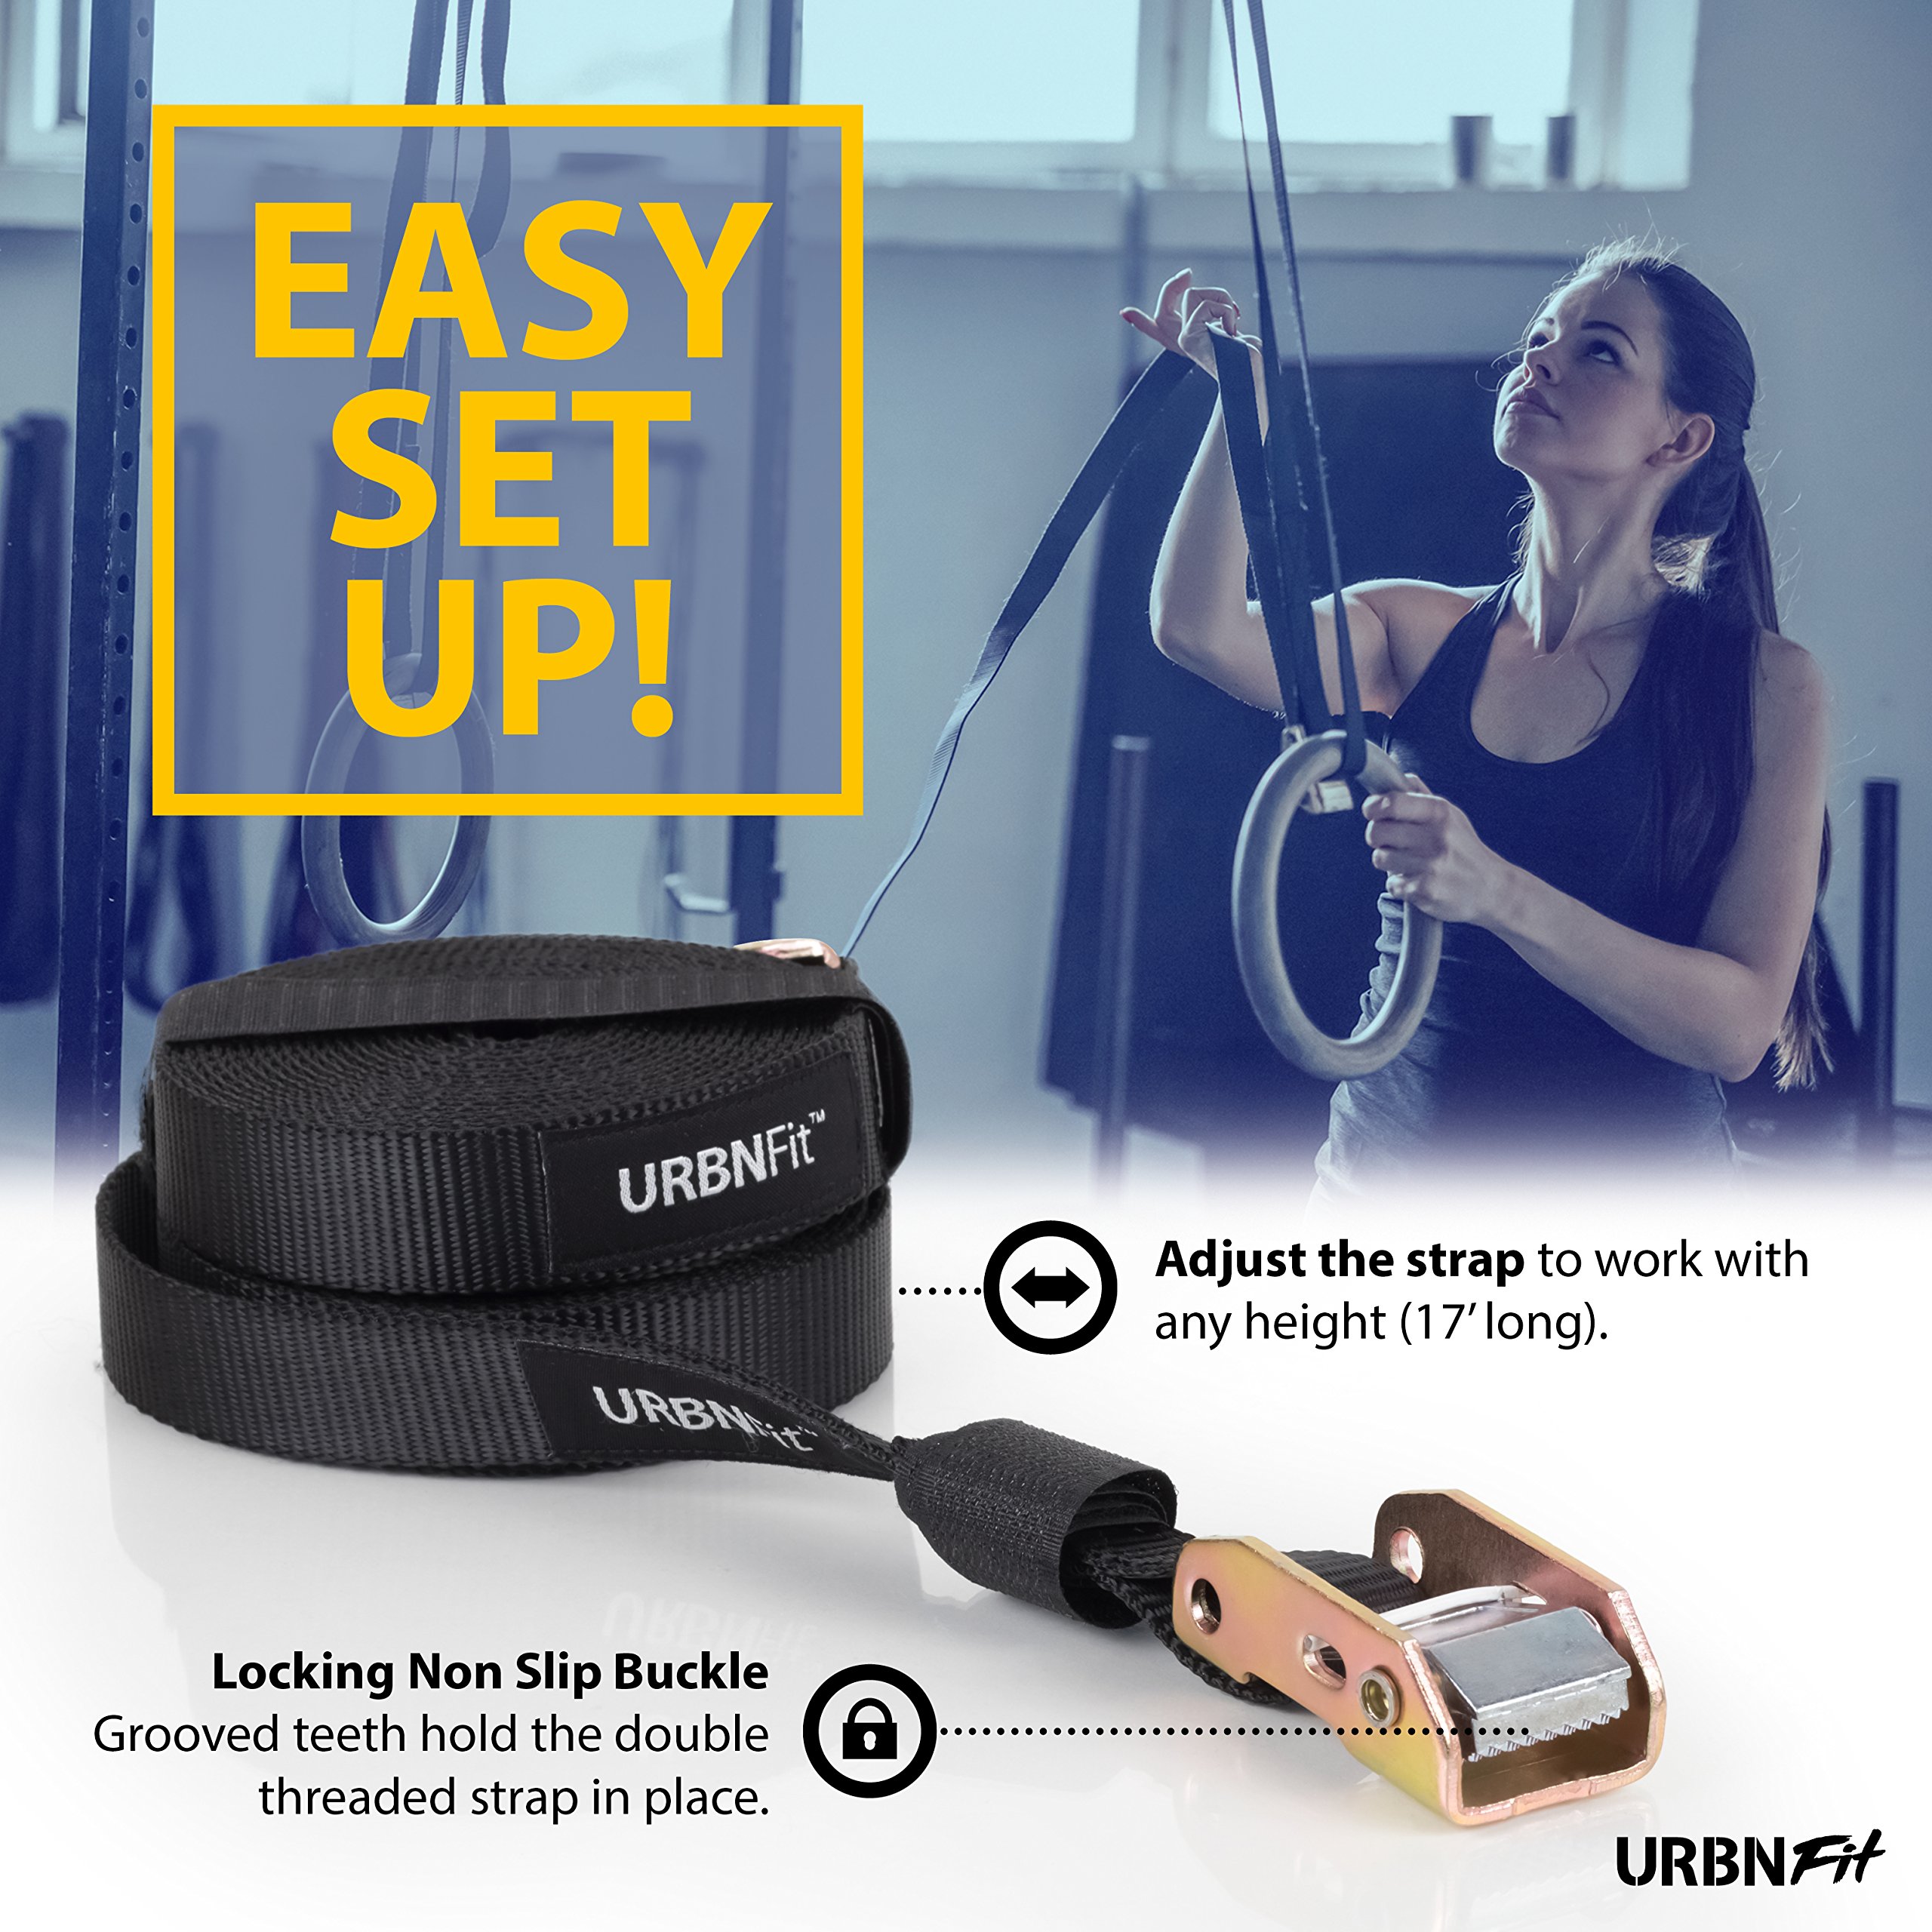 URBNFit Gymnastic Rings - Bodyweight Workout and Strength Training Olympic Non-Slip Rings with Adjustable Straps for Crossfit and at Home Gym Workouts